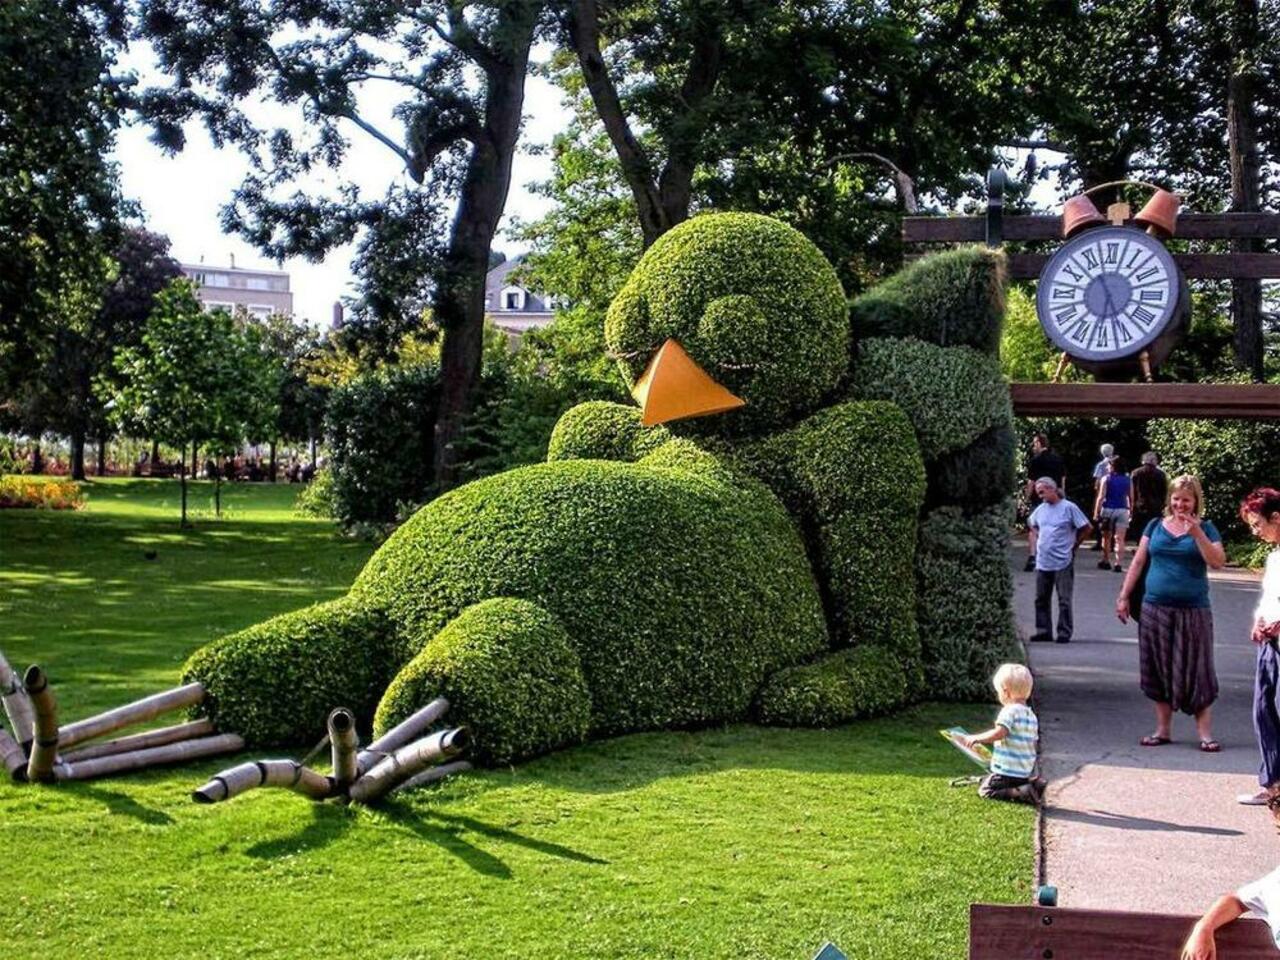 "Having a nap. Bird in the park in Nantes, #France. Find more incredible #streetart here: http://buff.ly/1Amonvs https://t.co/gYFGqcS8RO"